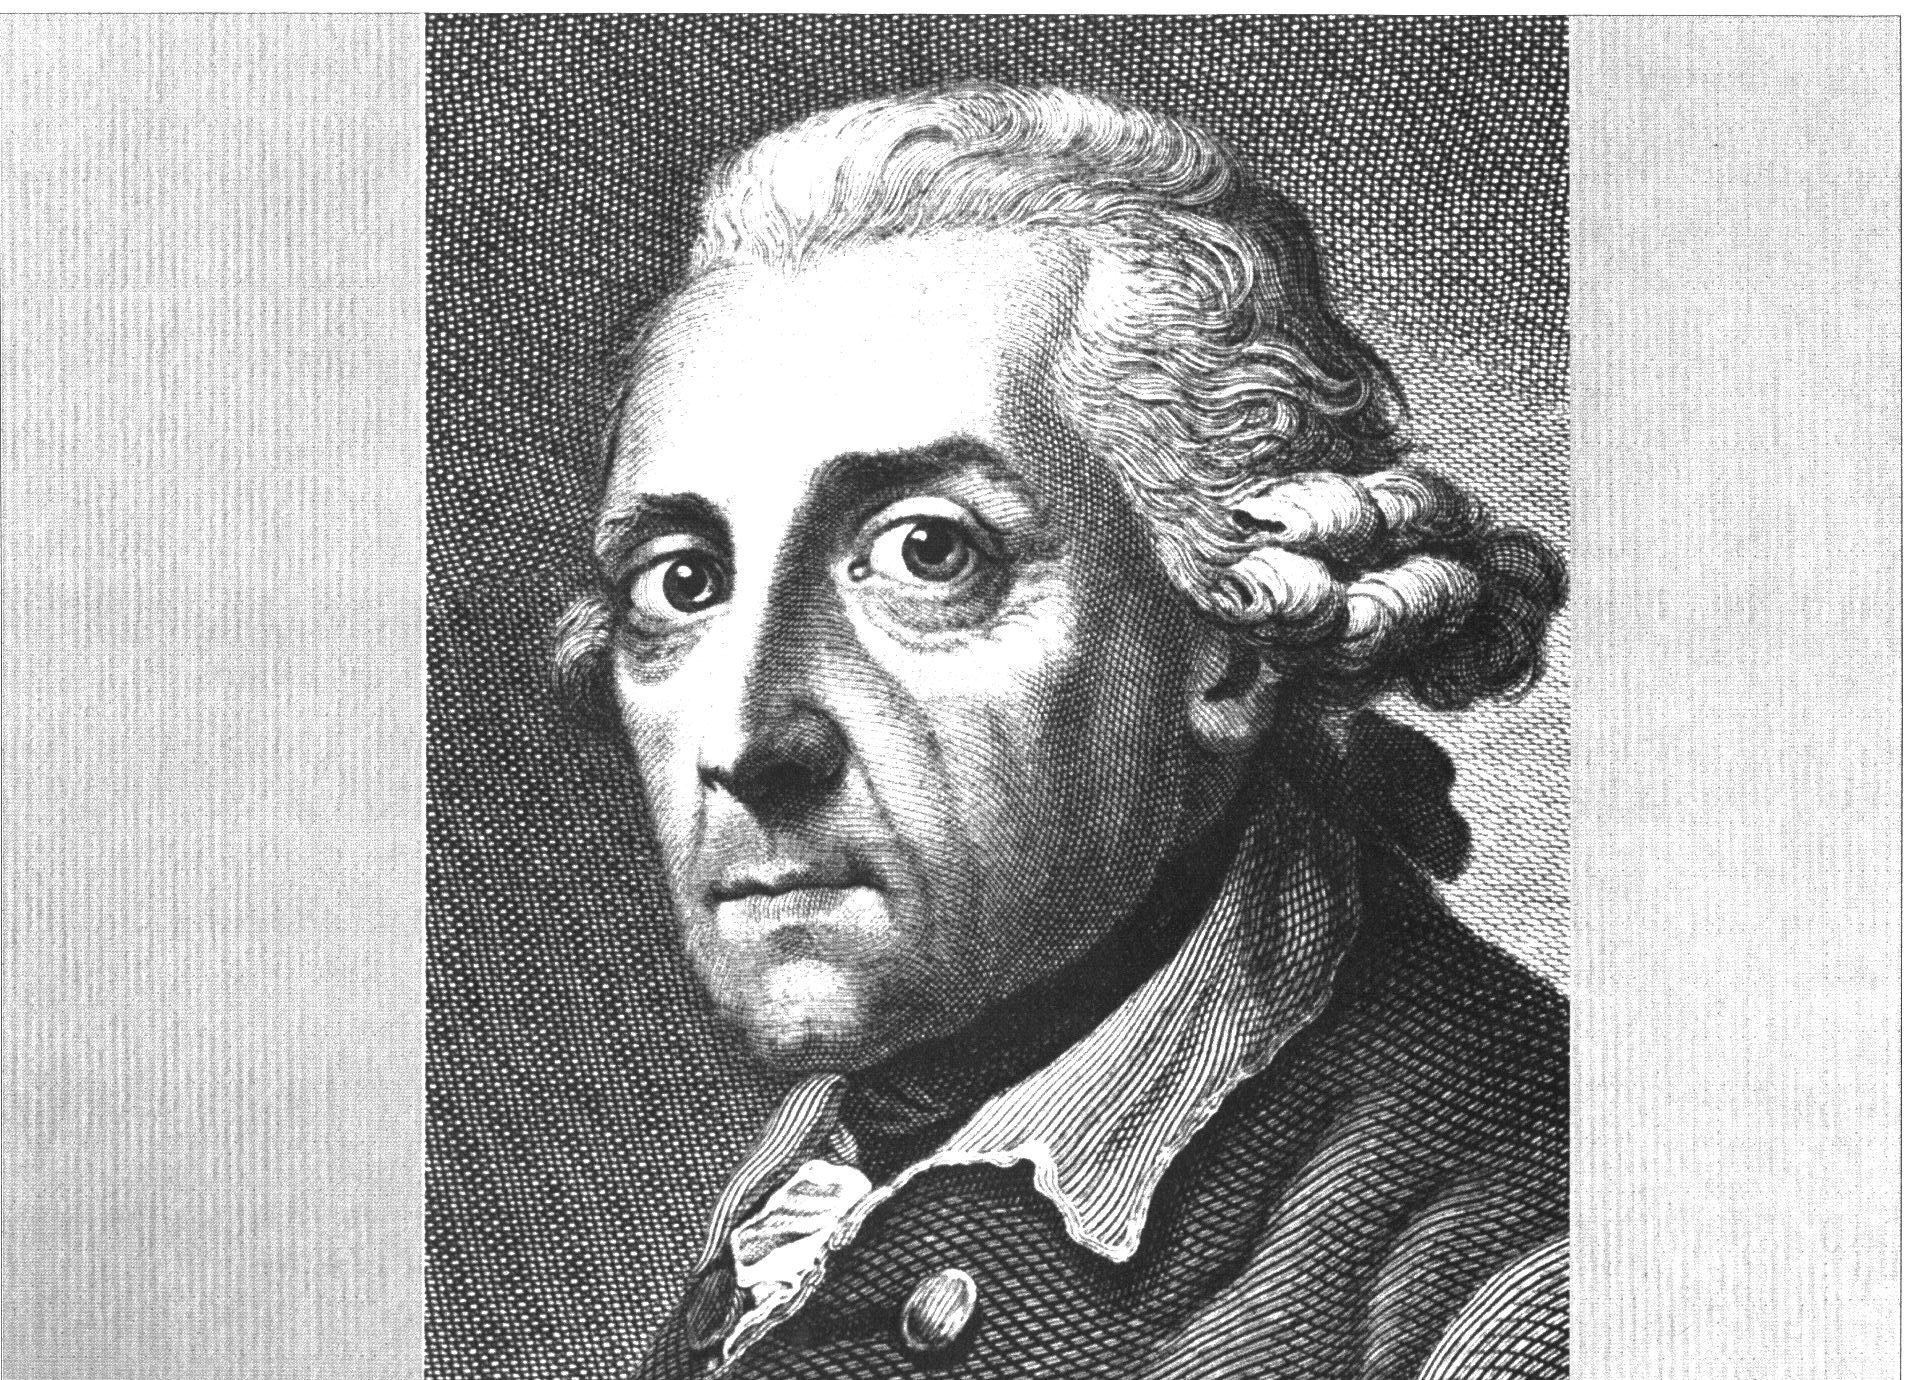 Leonhard Euler Quote: “For since the fabric of the universe is most perfect  and the work of a most wise Creator, nothing at all takes place in ”